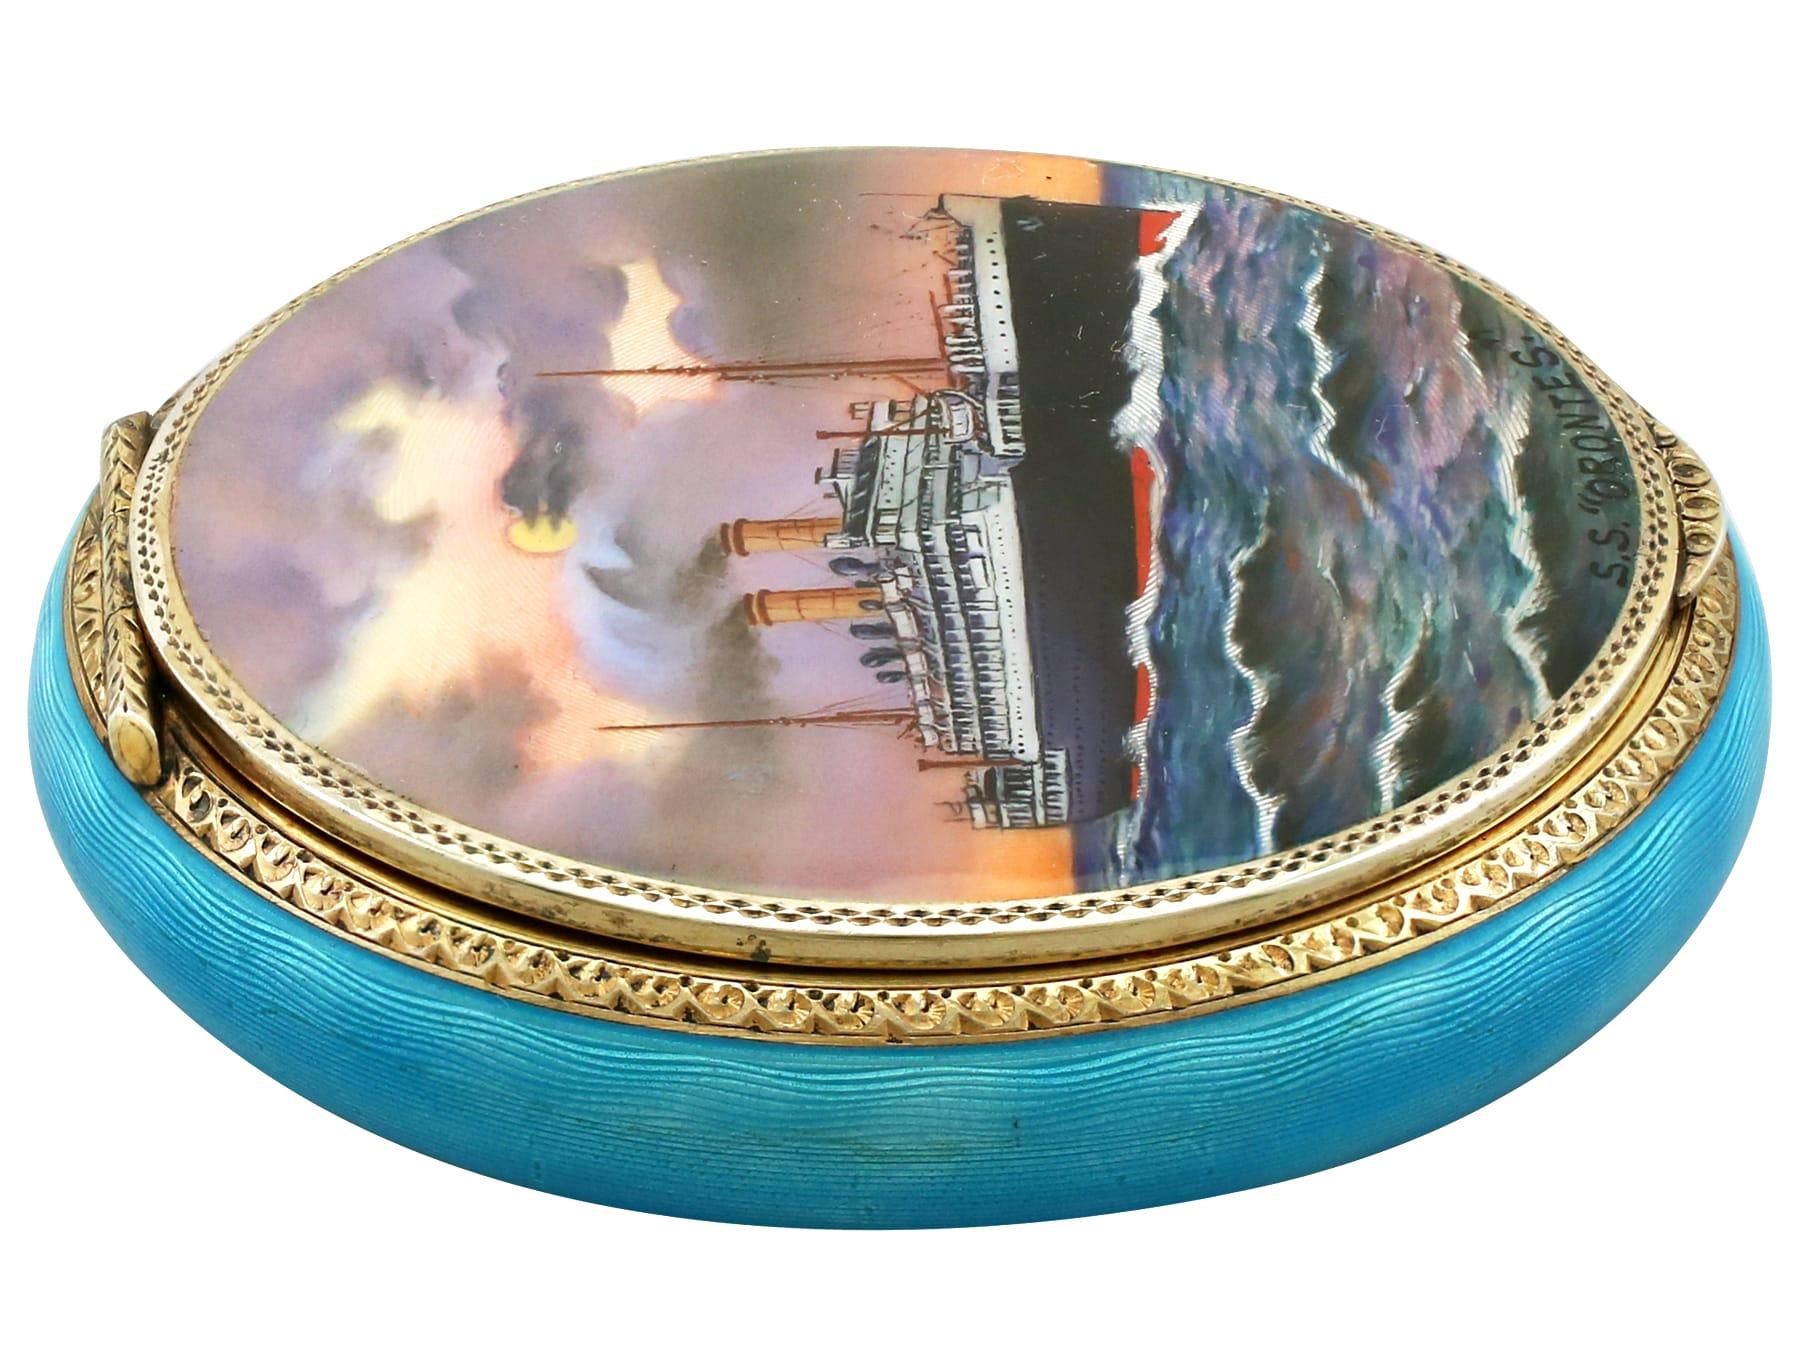 Antique Austrian Sterling Silver and Enamel Compact, circa 1940 In Excellent Condition For Sale In Jesmond, Newcastle Upon Tyne